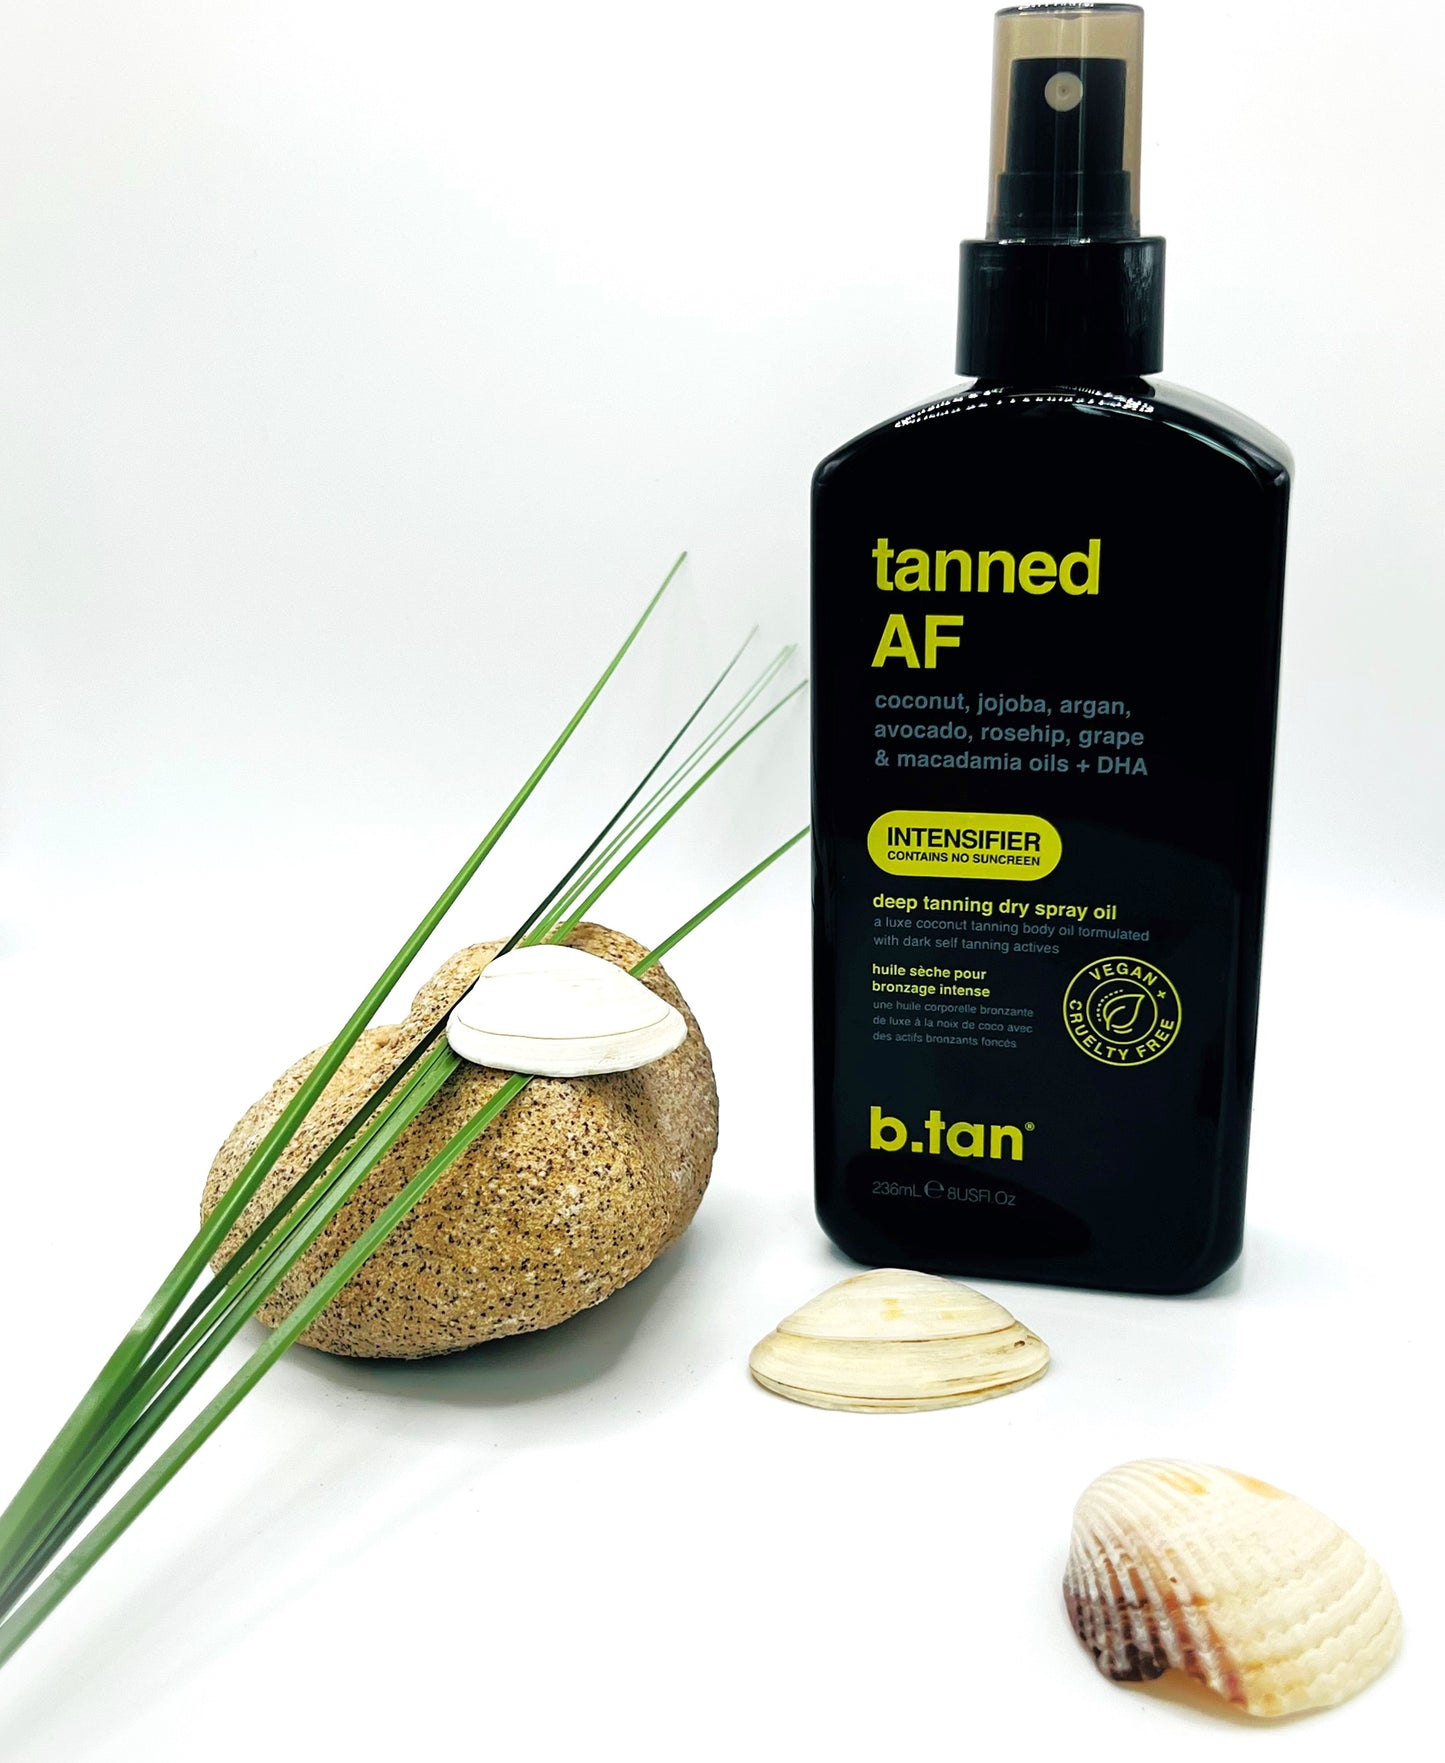 Tanned AF Tanning Oil 236ml - by b.tan